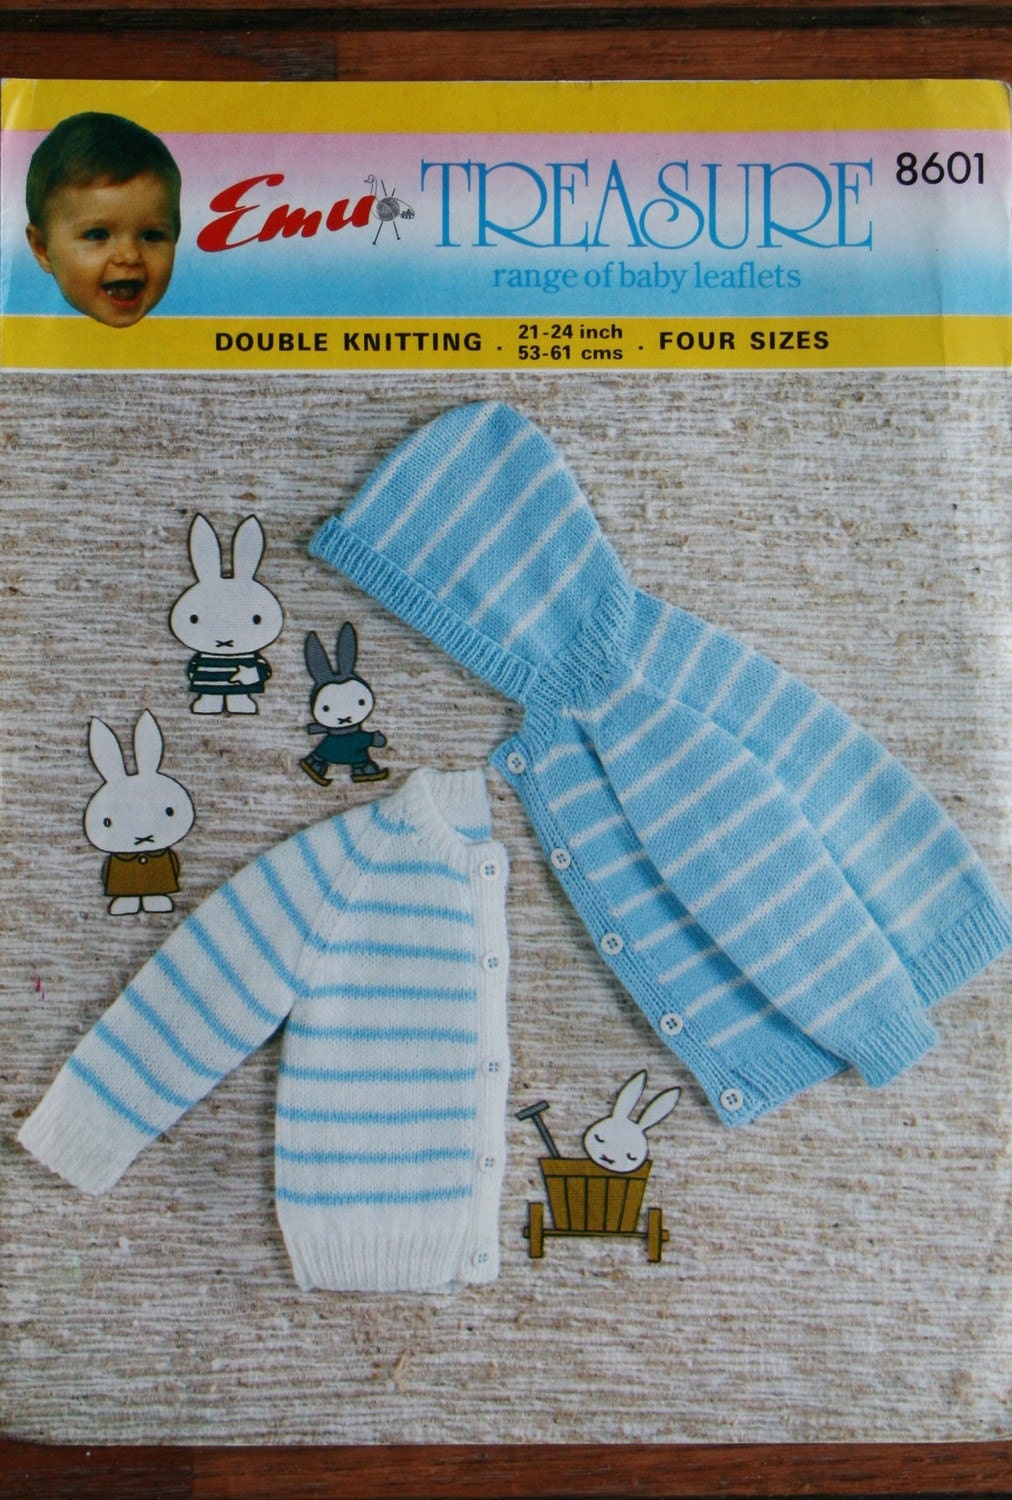 Vintage knitted doll patterns available from The Retro Knitting